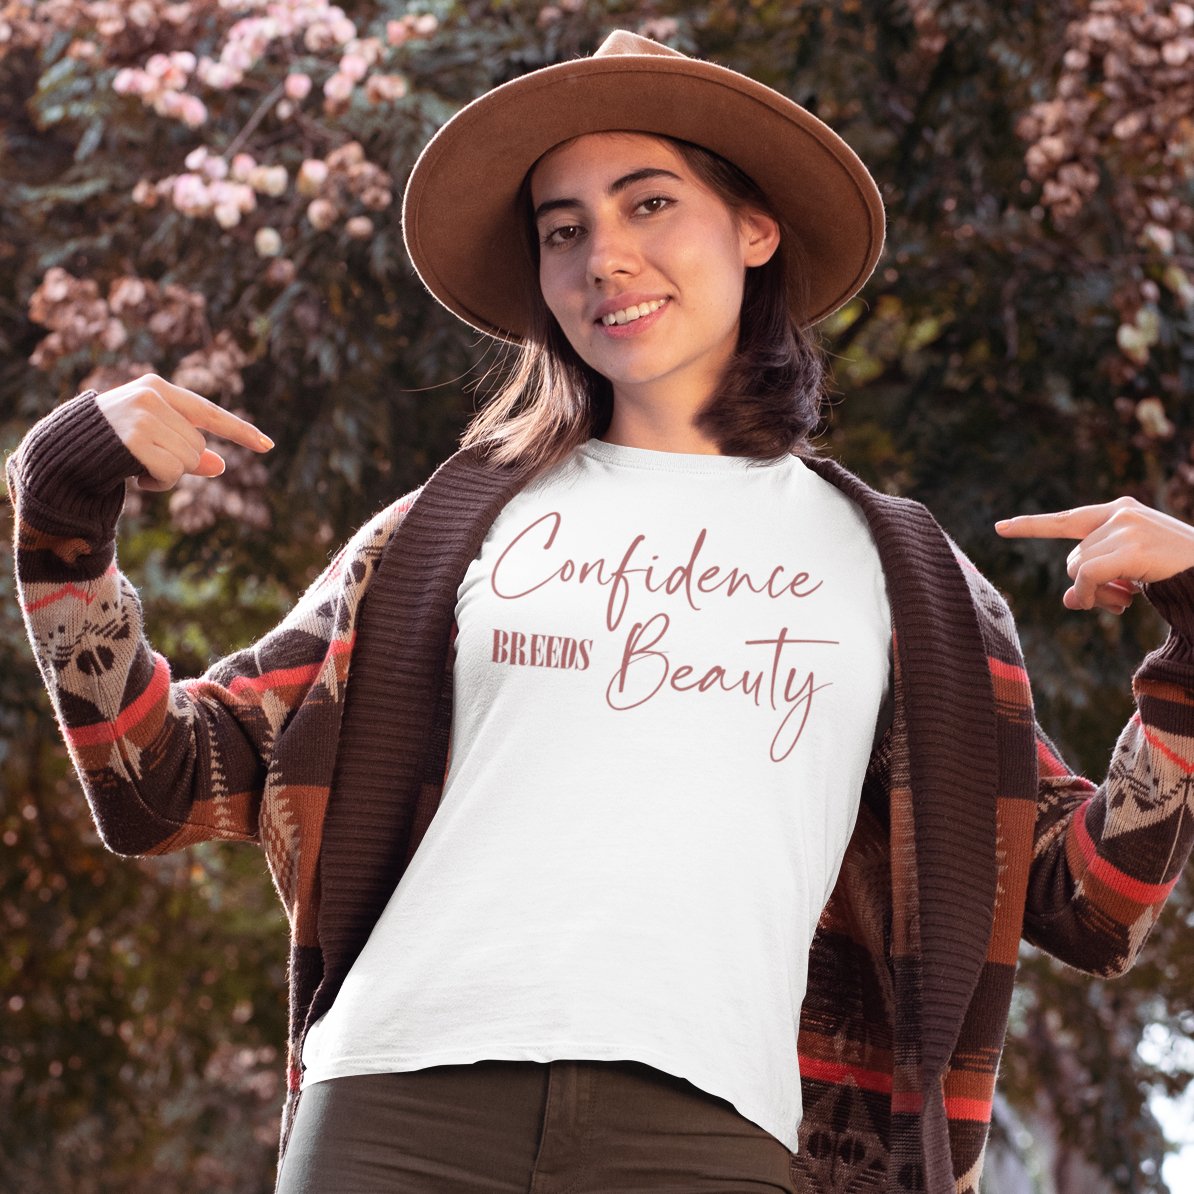 Woman wearing a confidence breeds beauty in a rose color print t-shirt